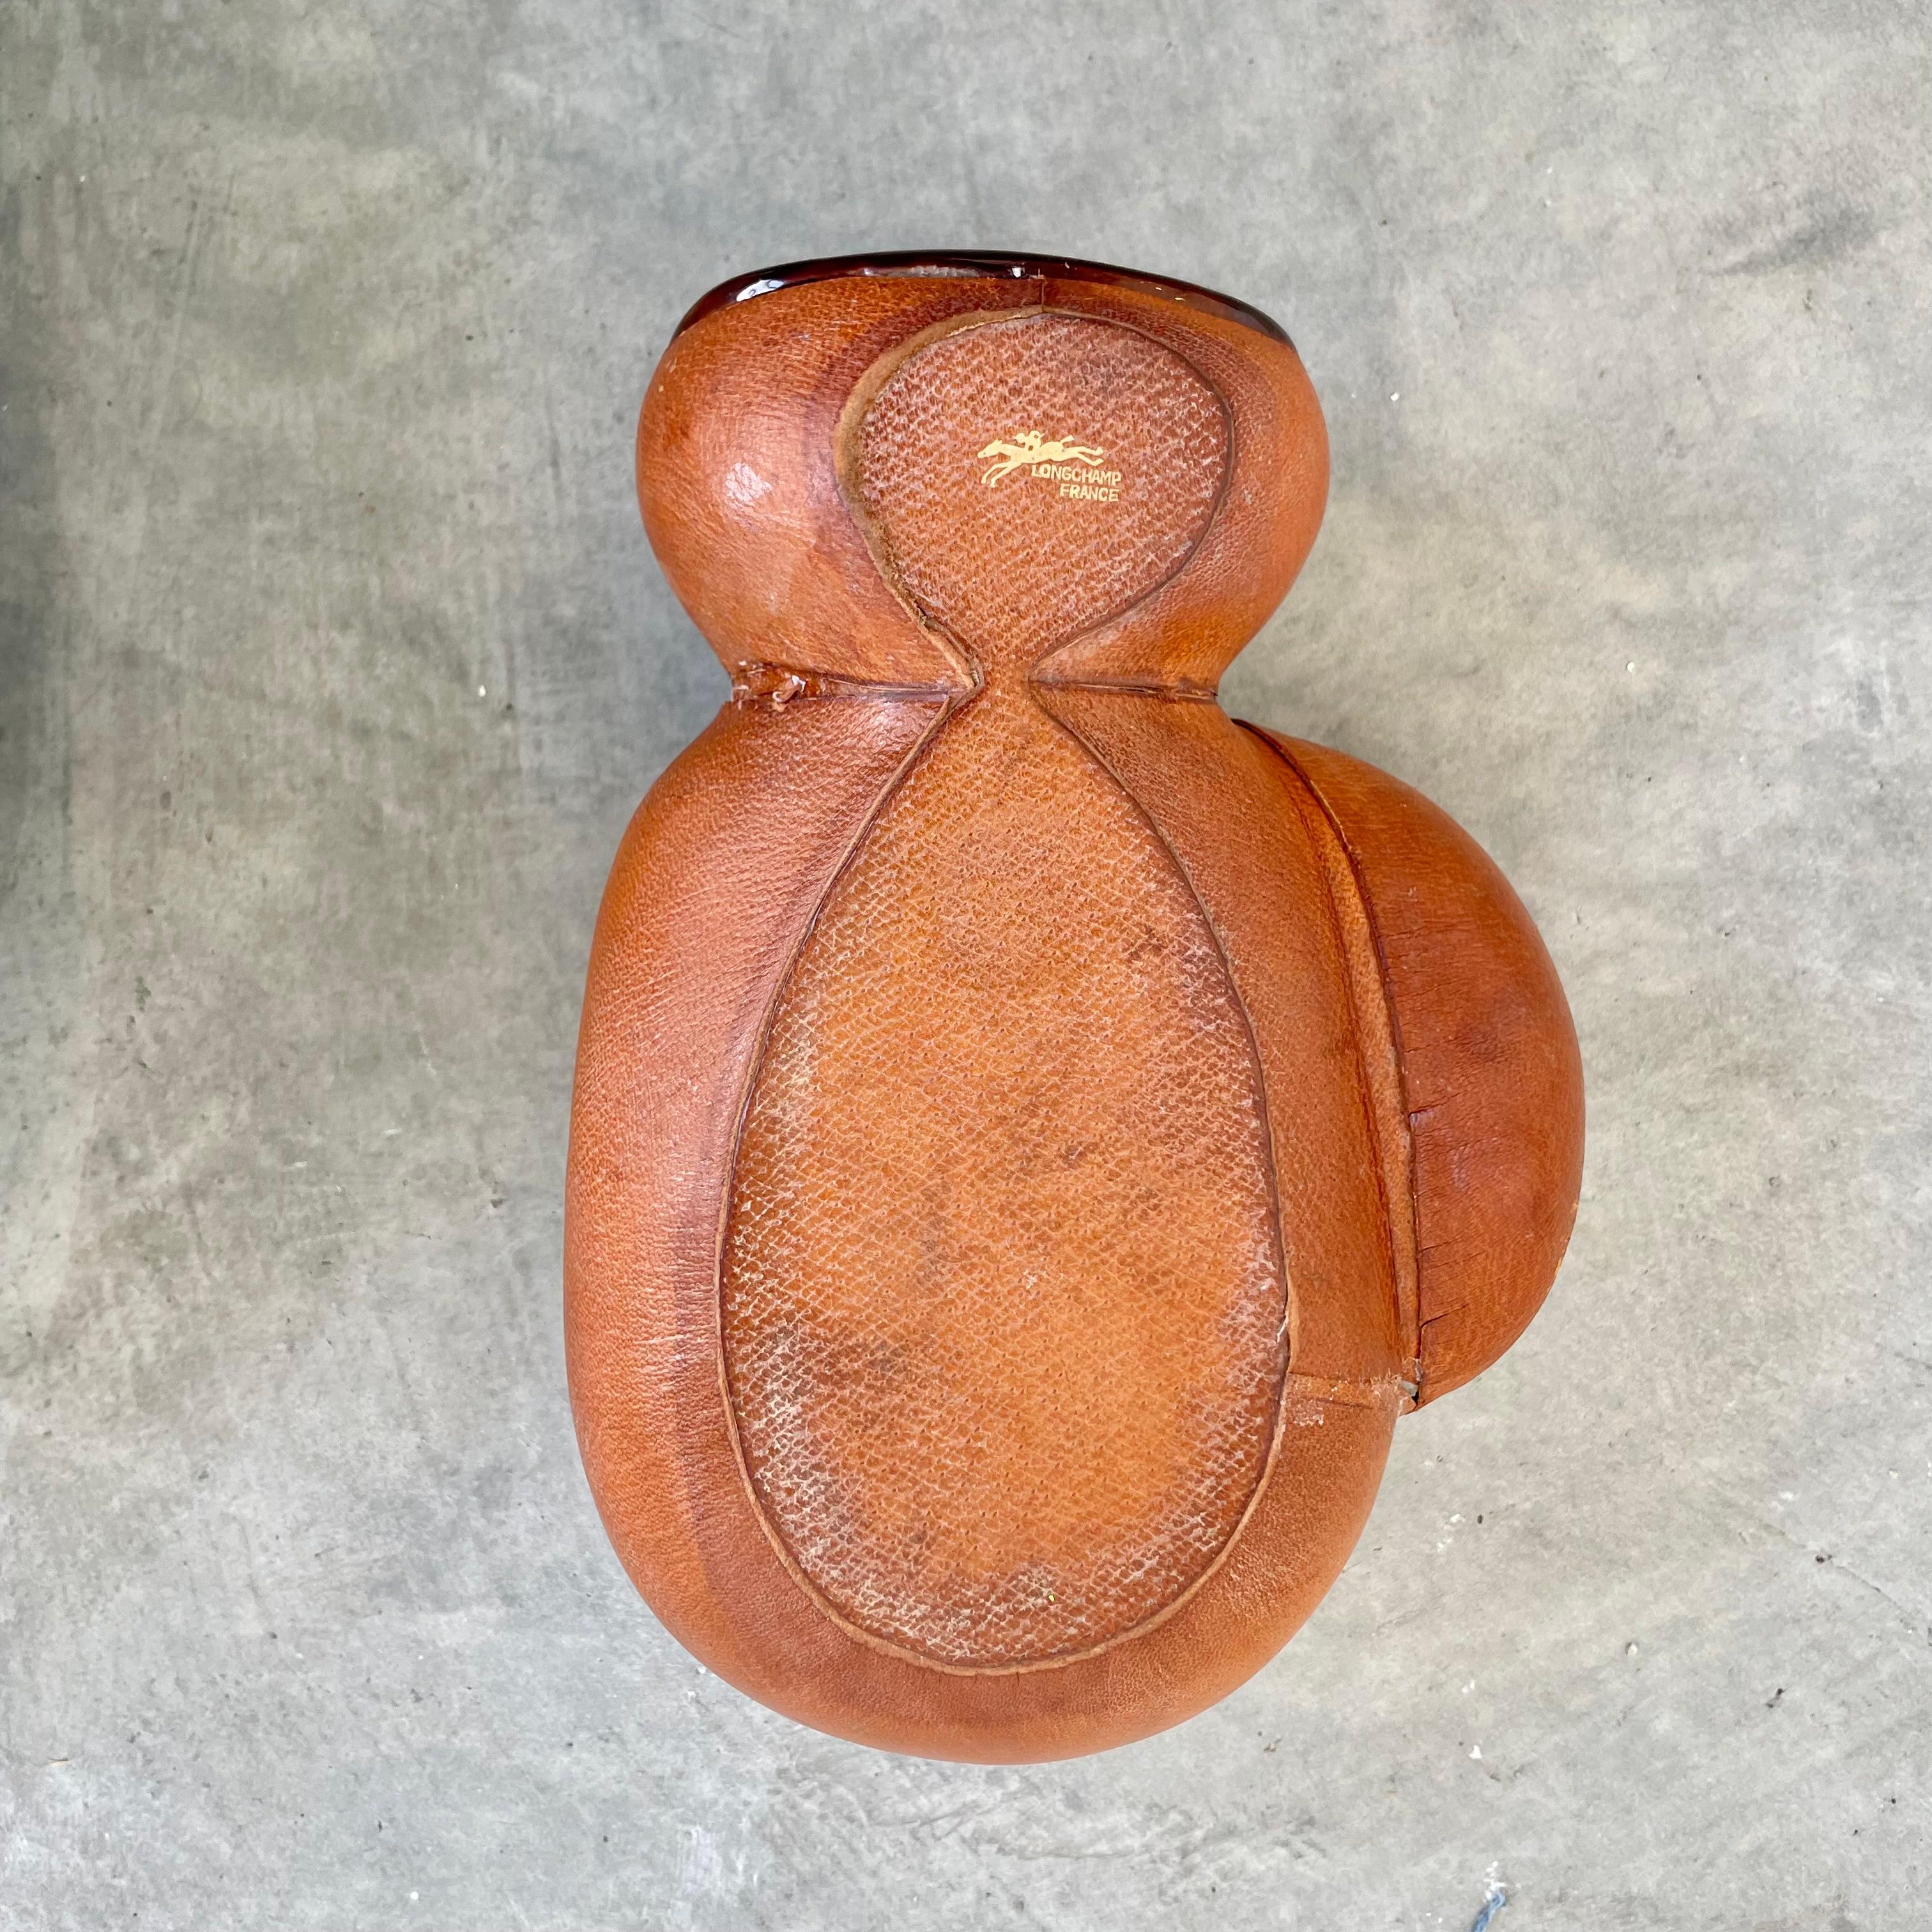 Longchamp Leather and Ceramic Boxing Glove Catchall, 1950s France For Sale 1